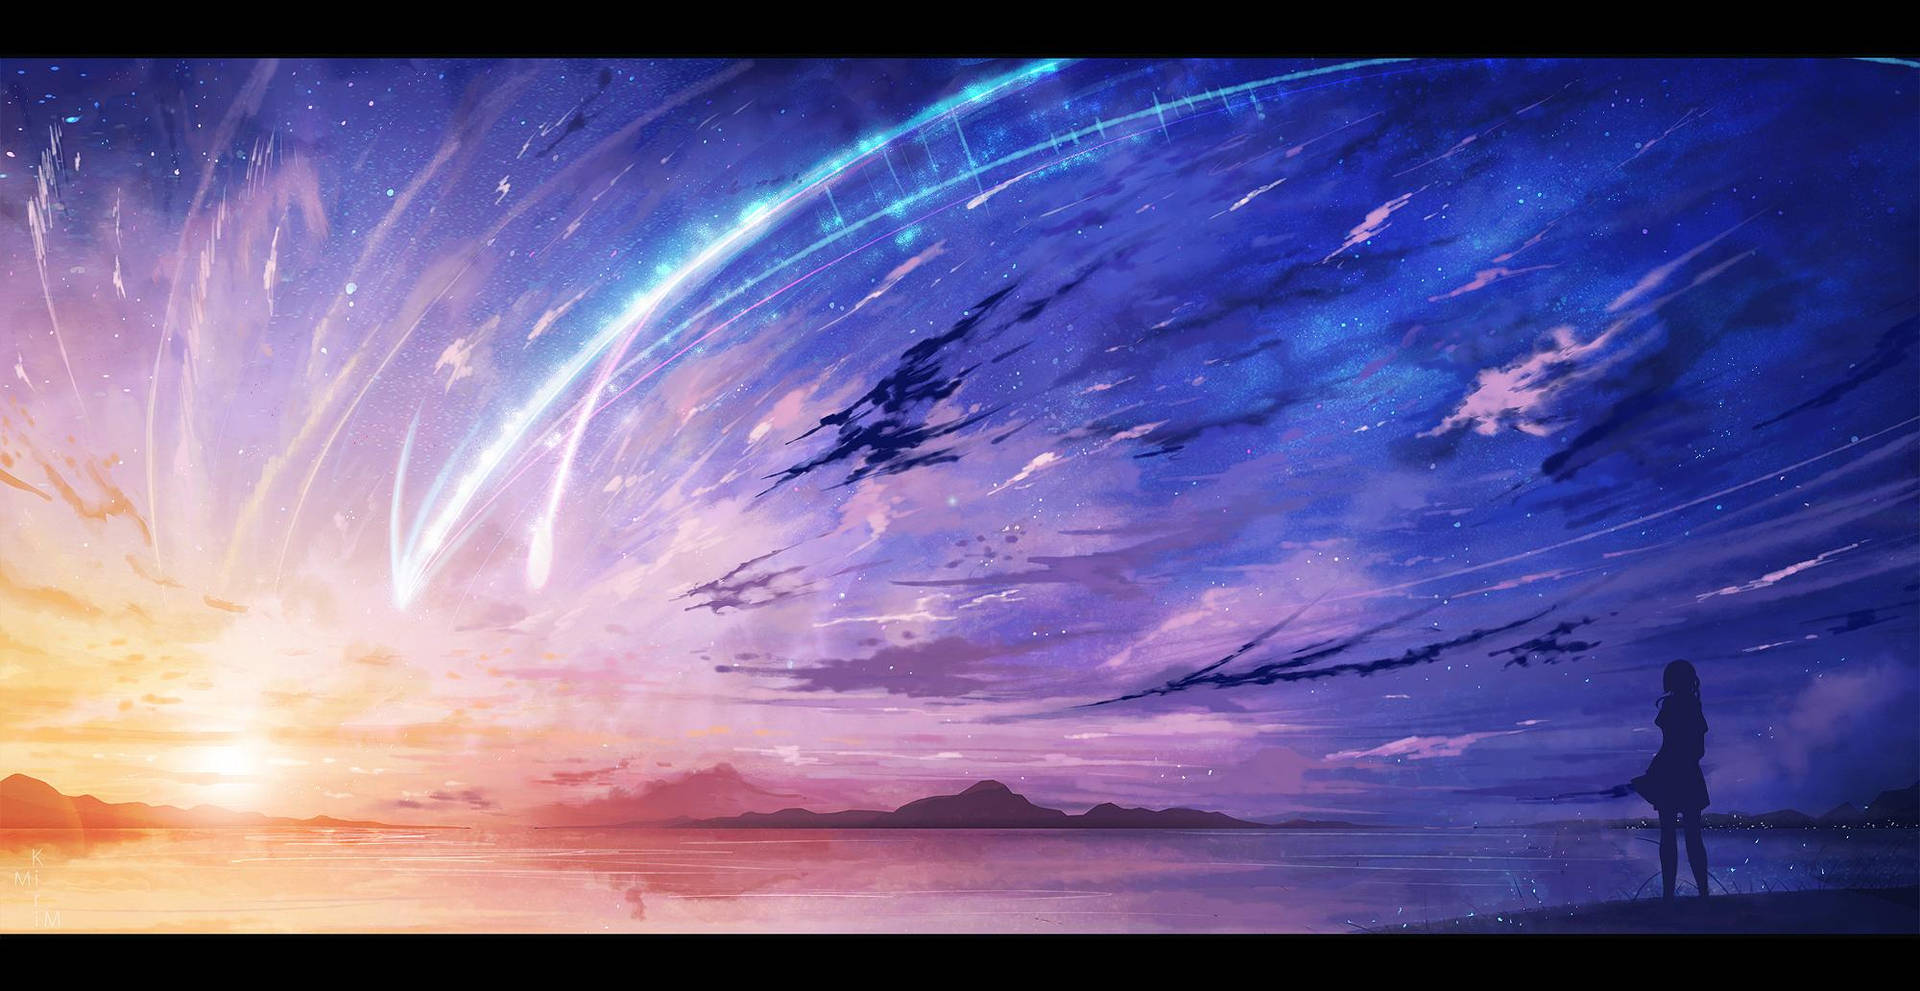 Step into the stars and explore Your Name with the magical cosmic anime sky! Wallpaper